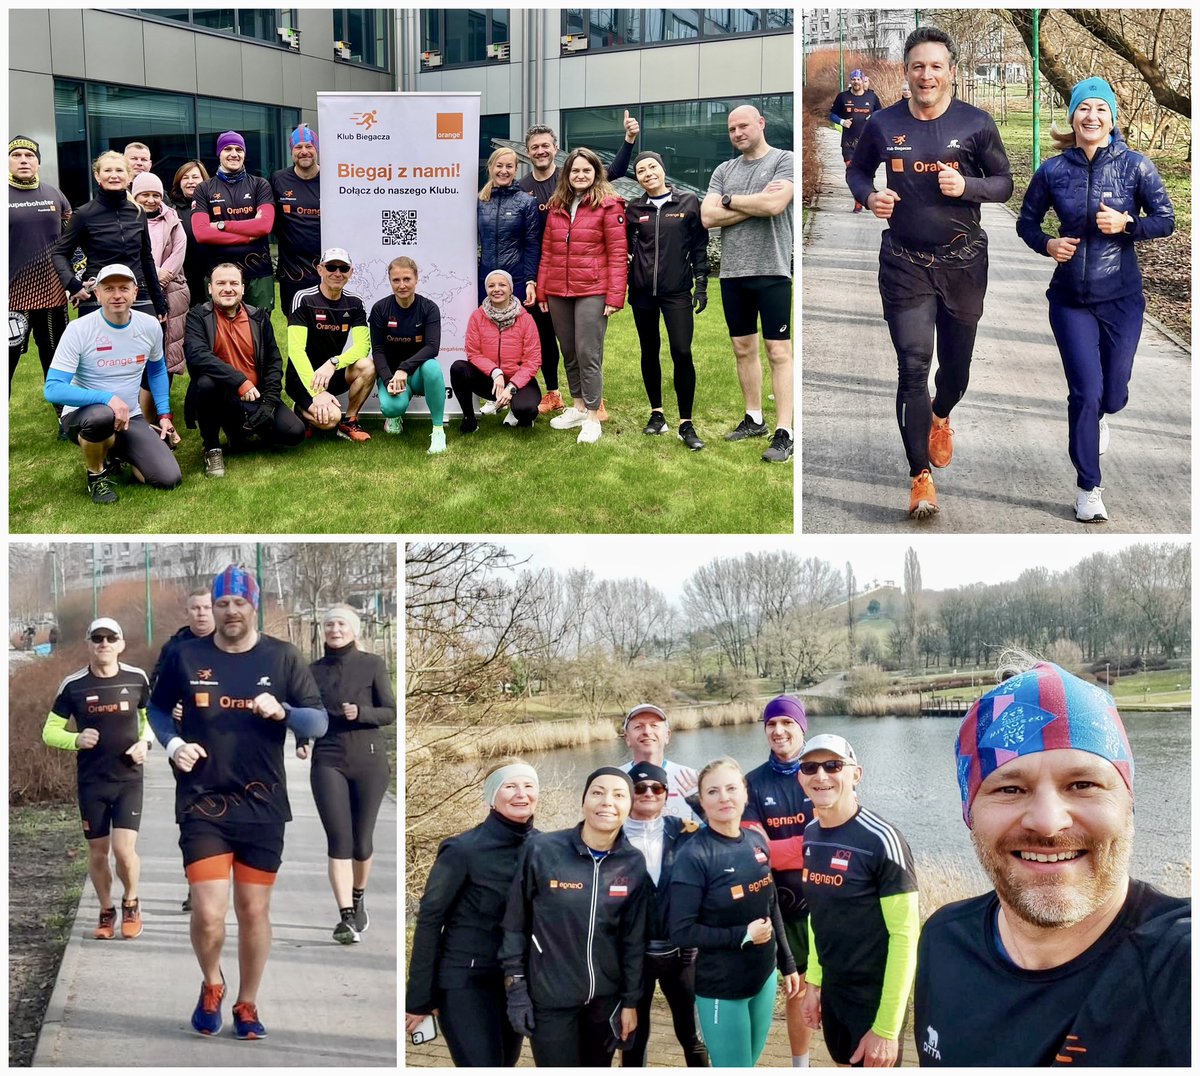 Energising morning workout 😊 ☀️led by Running Club @Orange_Polska 🏃‍♂️ Getting ready for the spring, staying active & fit and also supporting #AllConnected challenge. Nearly 1600 colleagues in Poland already participating, with almost 13 thousand km so far! Every step matters -…